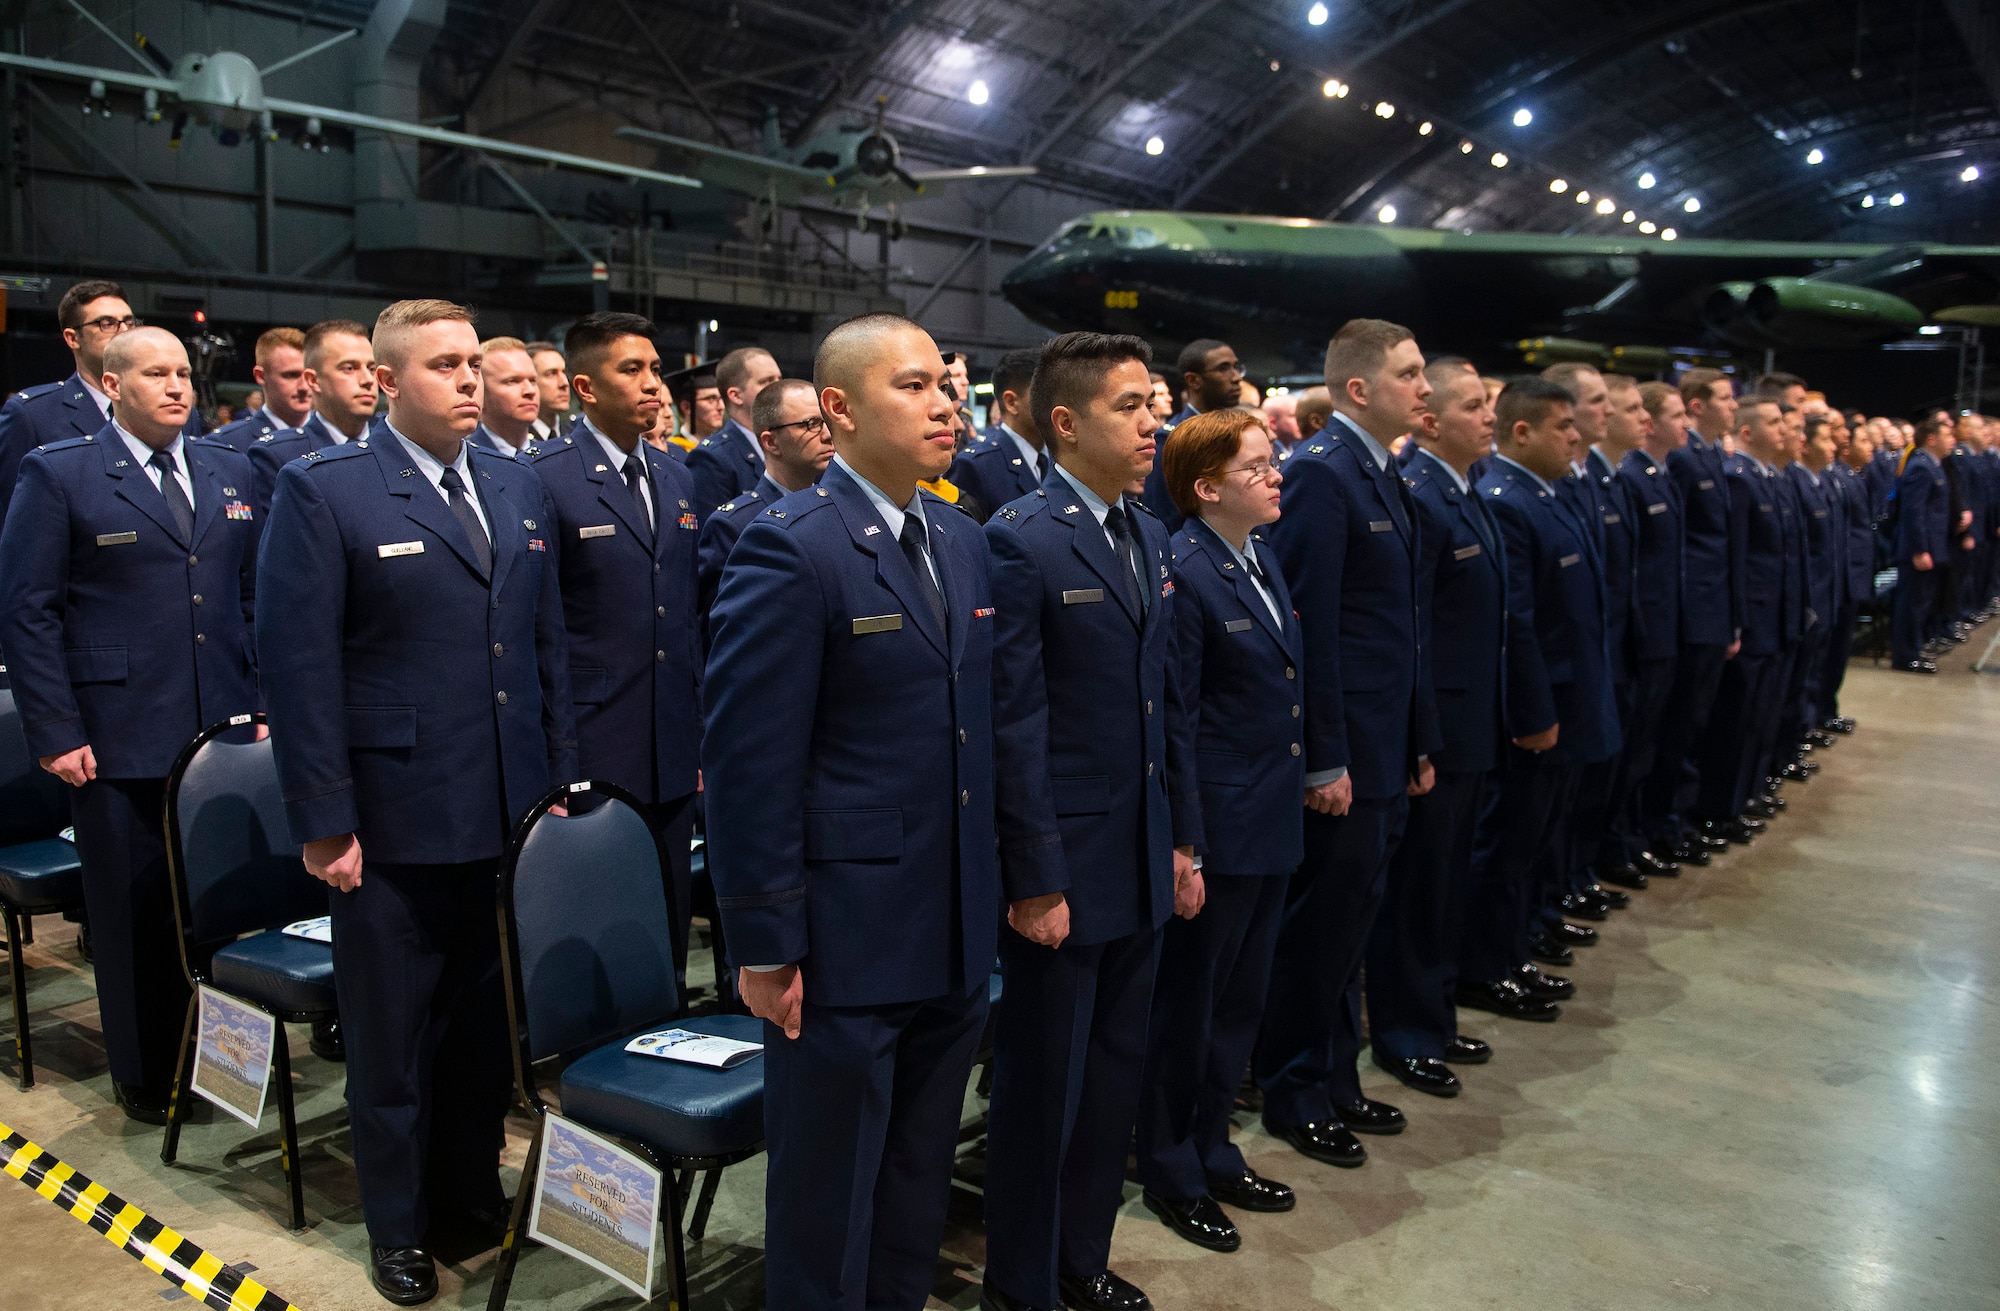 190321-F-JW079-2091
Graduates take their places at the start of the Air Force Institute of Technology commencement ceremony March 21, 2019, at the National Museum of the U.S. Air Force, Wright-Patterson Air Force Base, Ohio. More than 200 master’s degrees and 20 doctoral degrees were presented during the ceremony. (U.S. Air Force photo by R.J. Oriez)